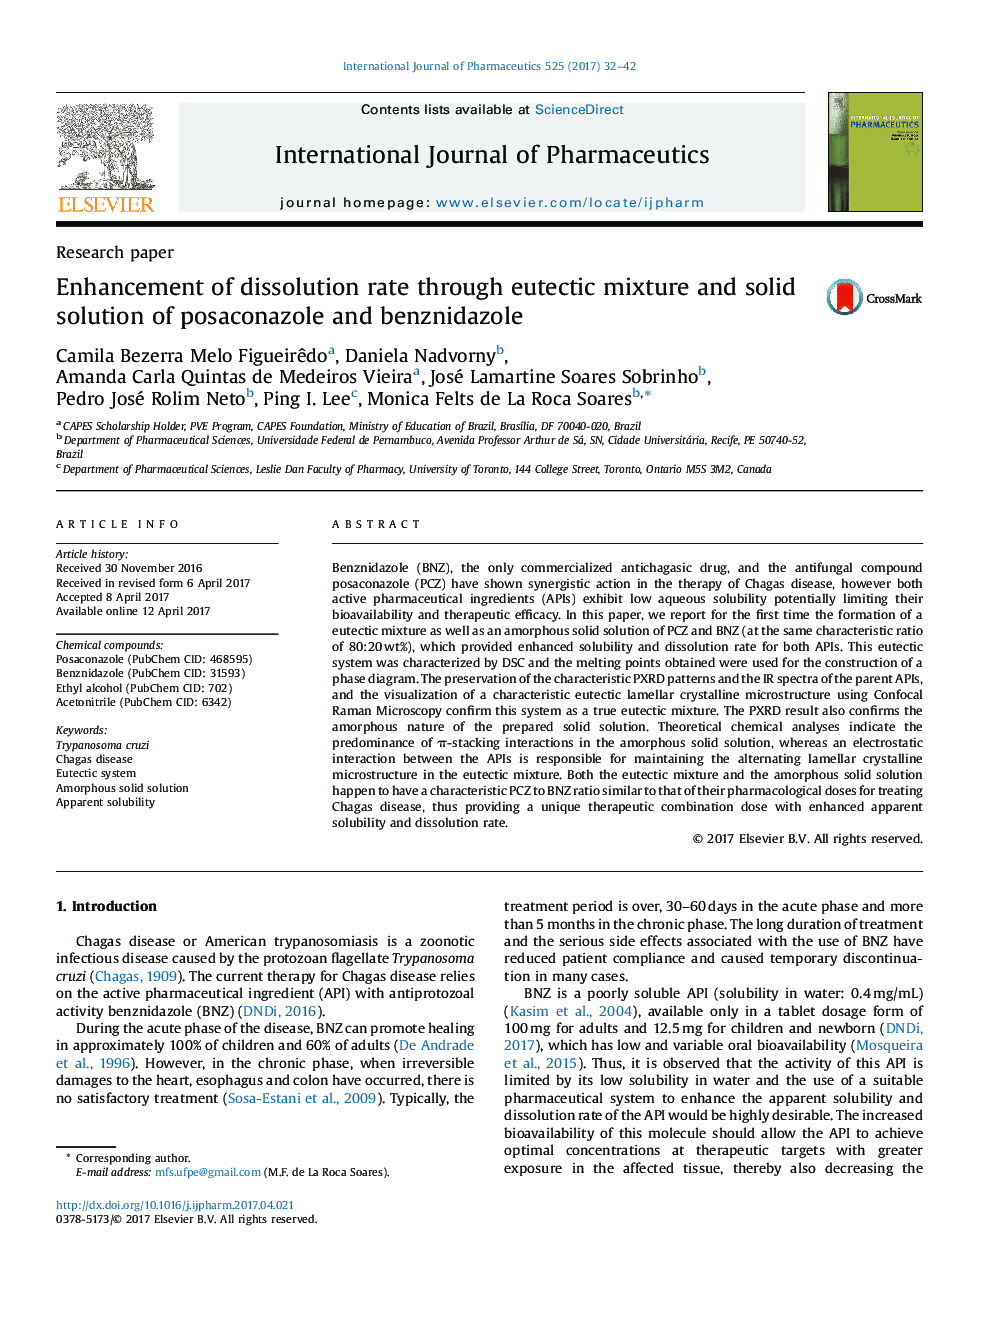 Enhancement of dissolution rate through eutectic mixture and solid solution of posaconazole and benznidazole